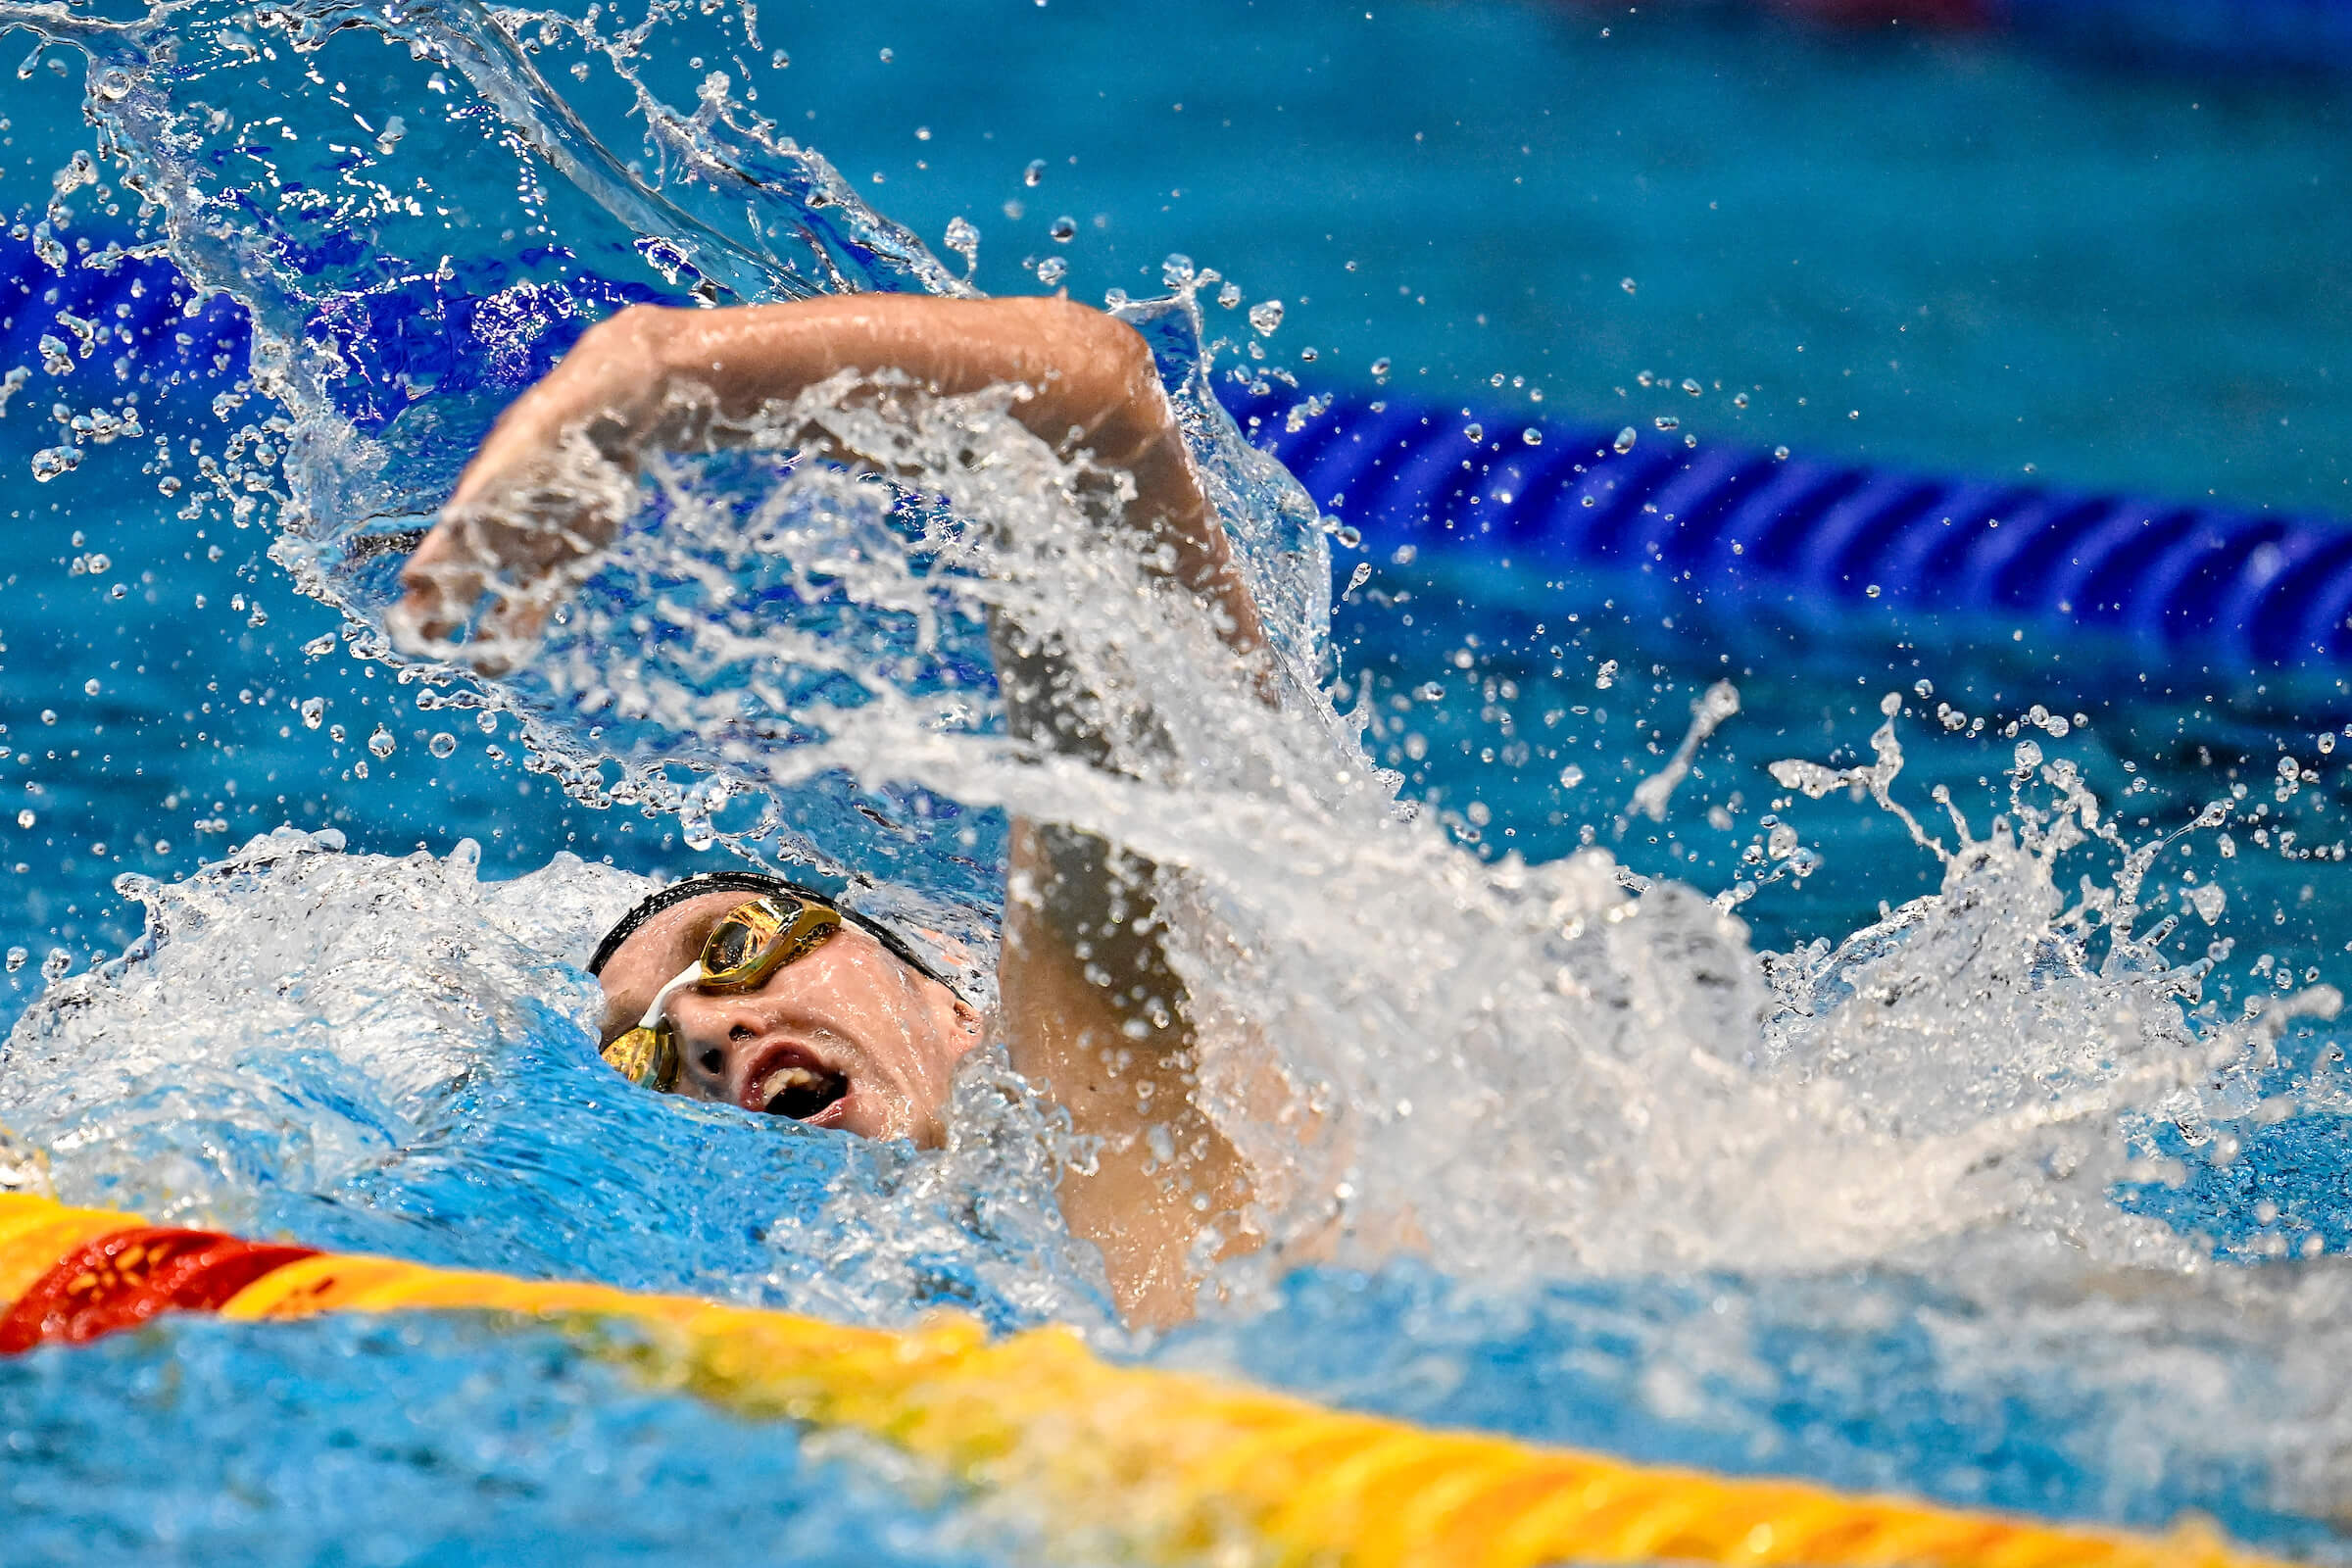 Daniel Wiffen of Ireland competes in the 800m Freestyle Men Final during the 20th World Aquatics Championships at the Marine Messe Hall A in Fukuoka (Japan), July 26rd, 2023. Daniel Wiffen placed 4th with the new european record.